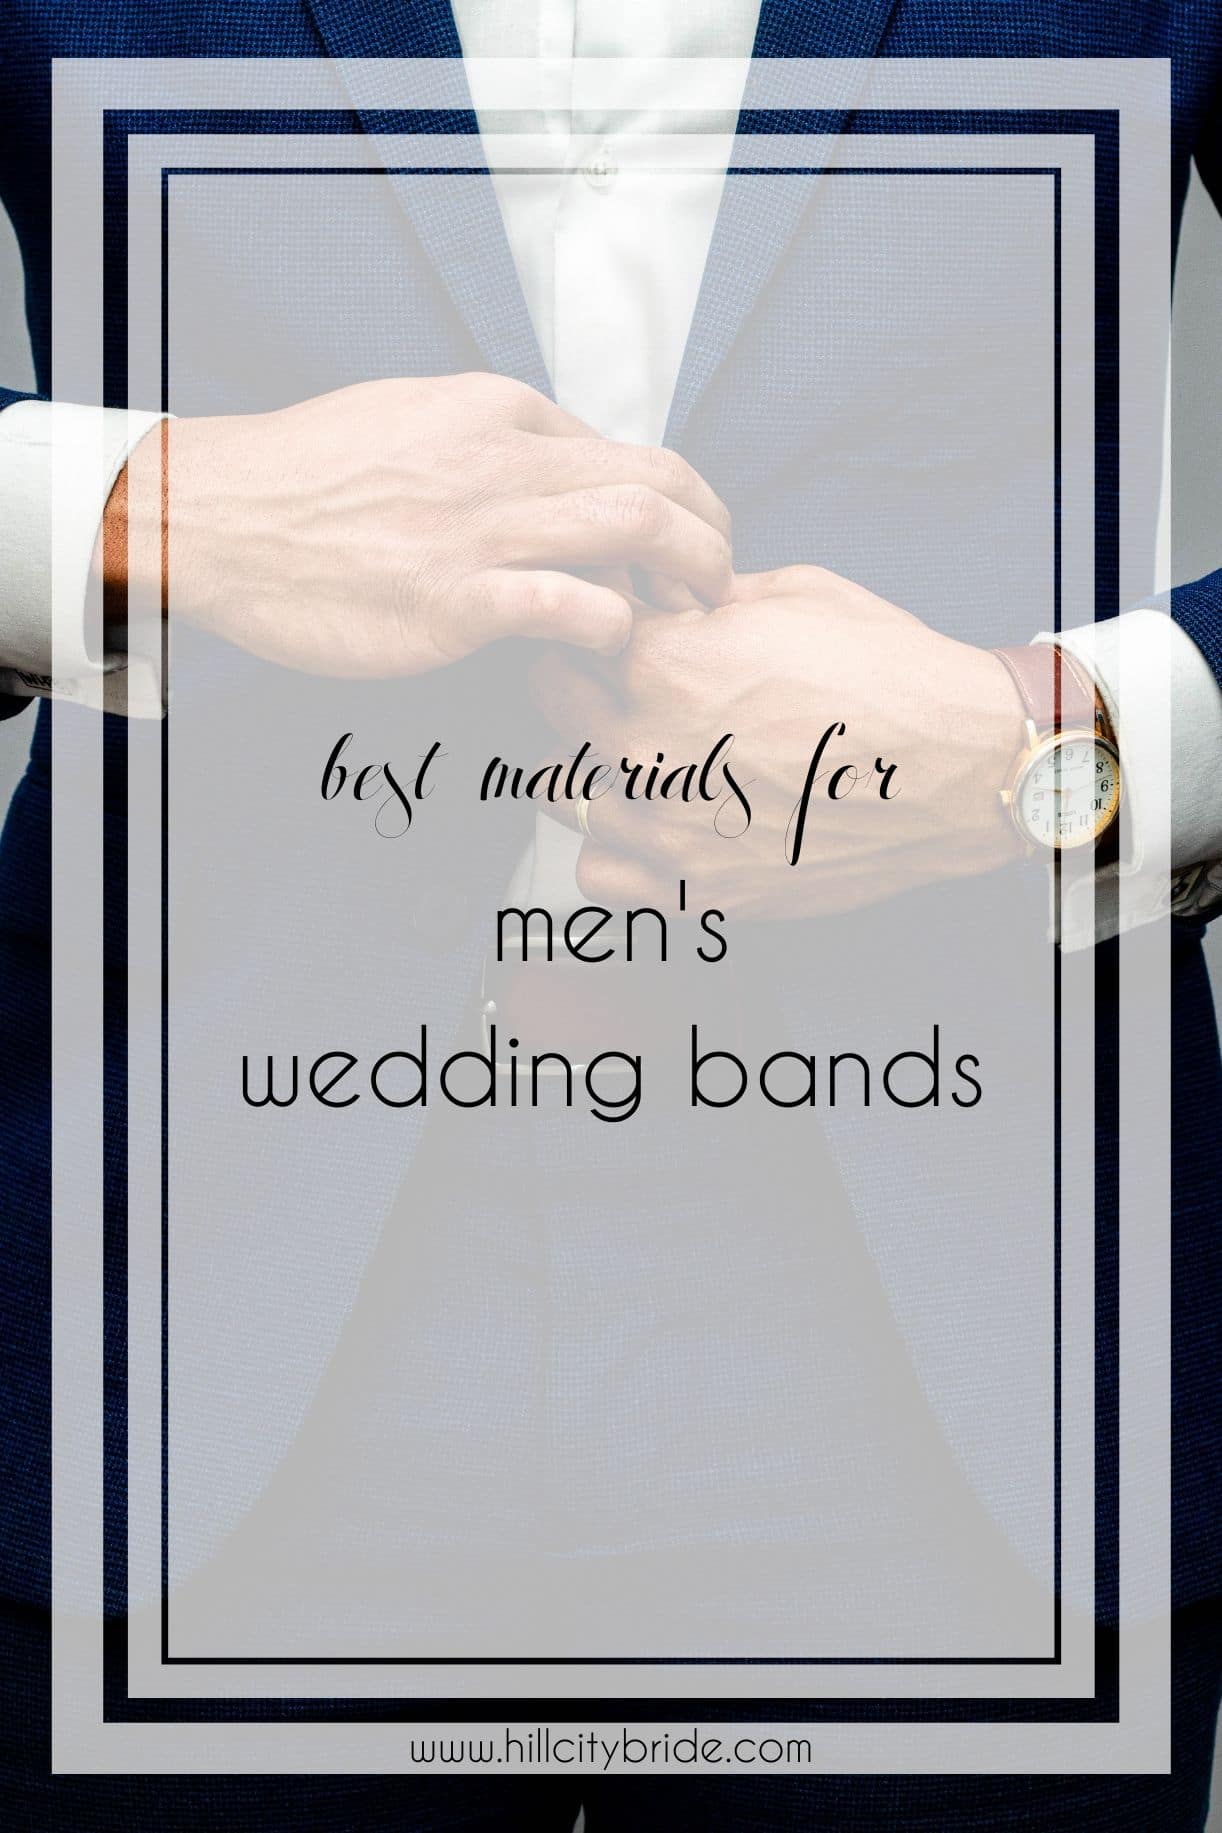 9 of the Best Materials for Men’s Wedding Bands to Last a Lifetime